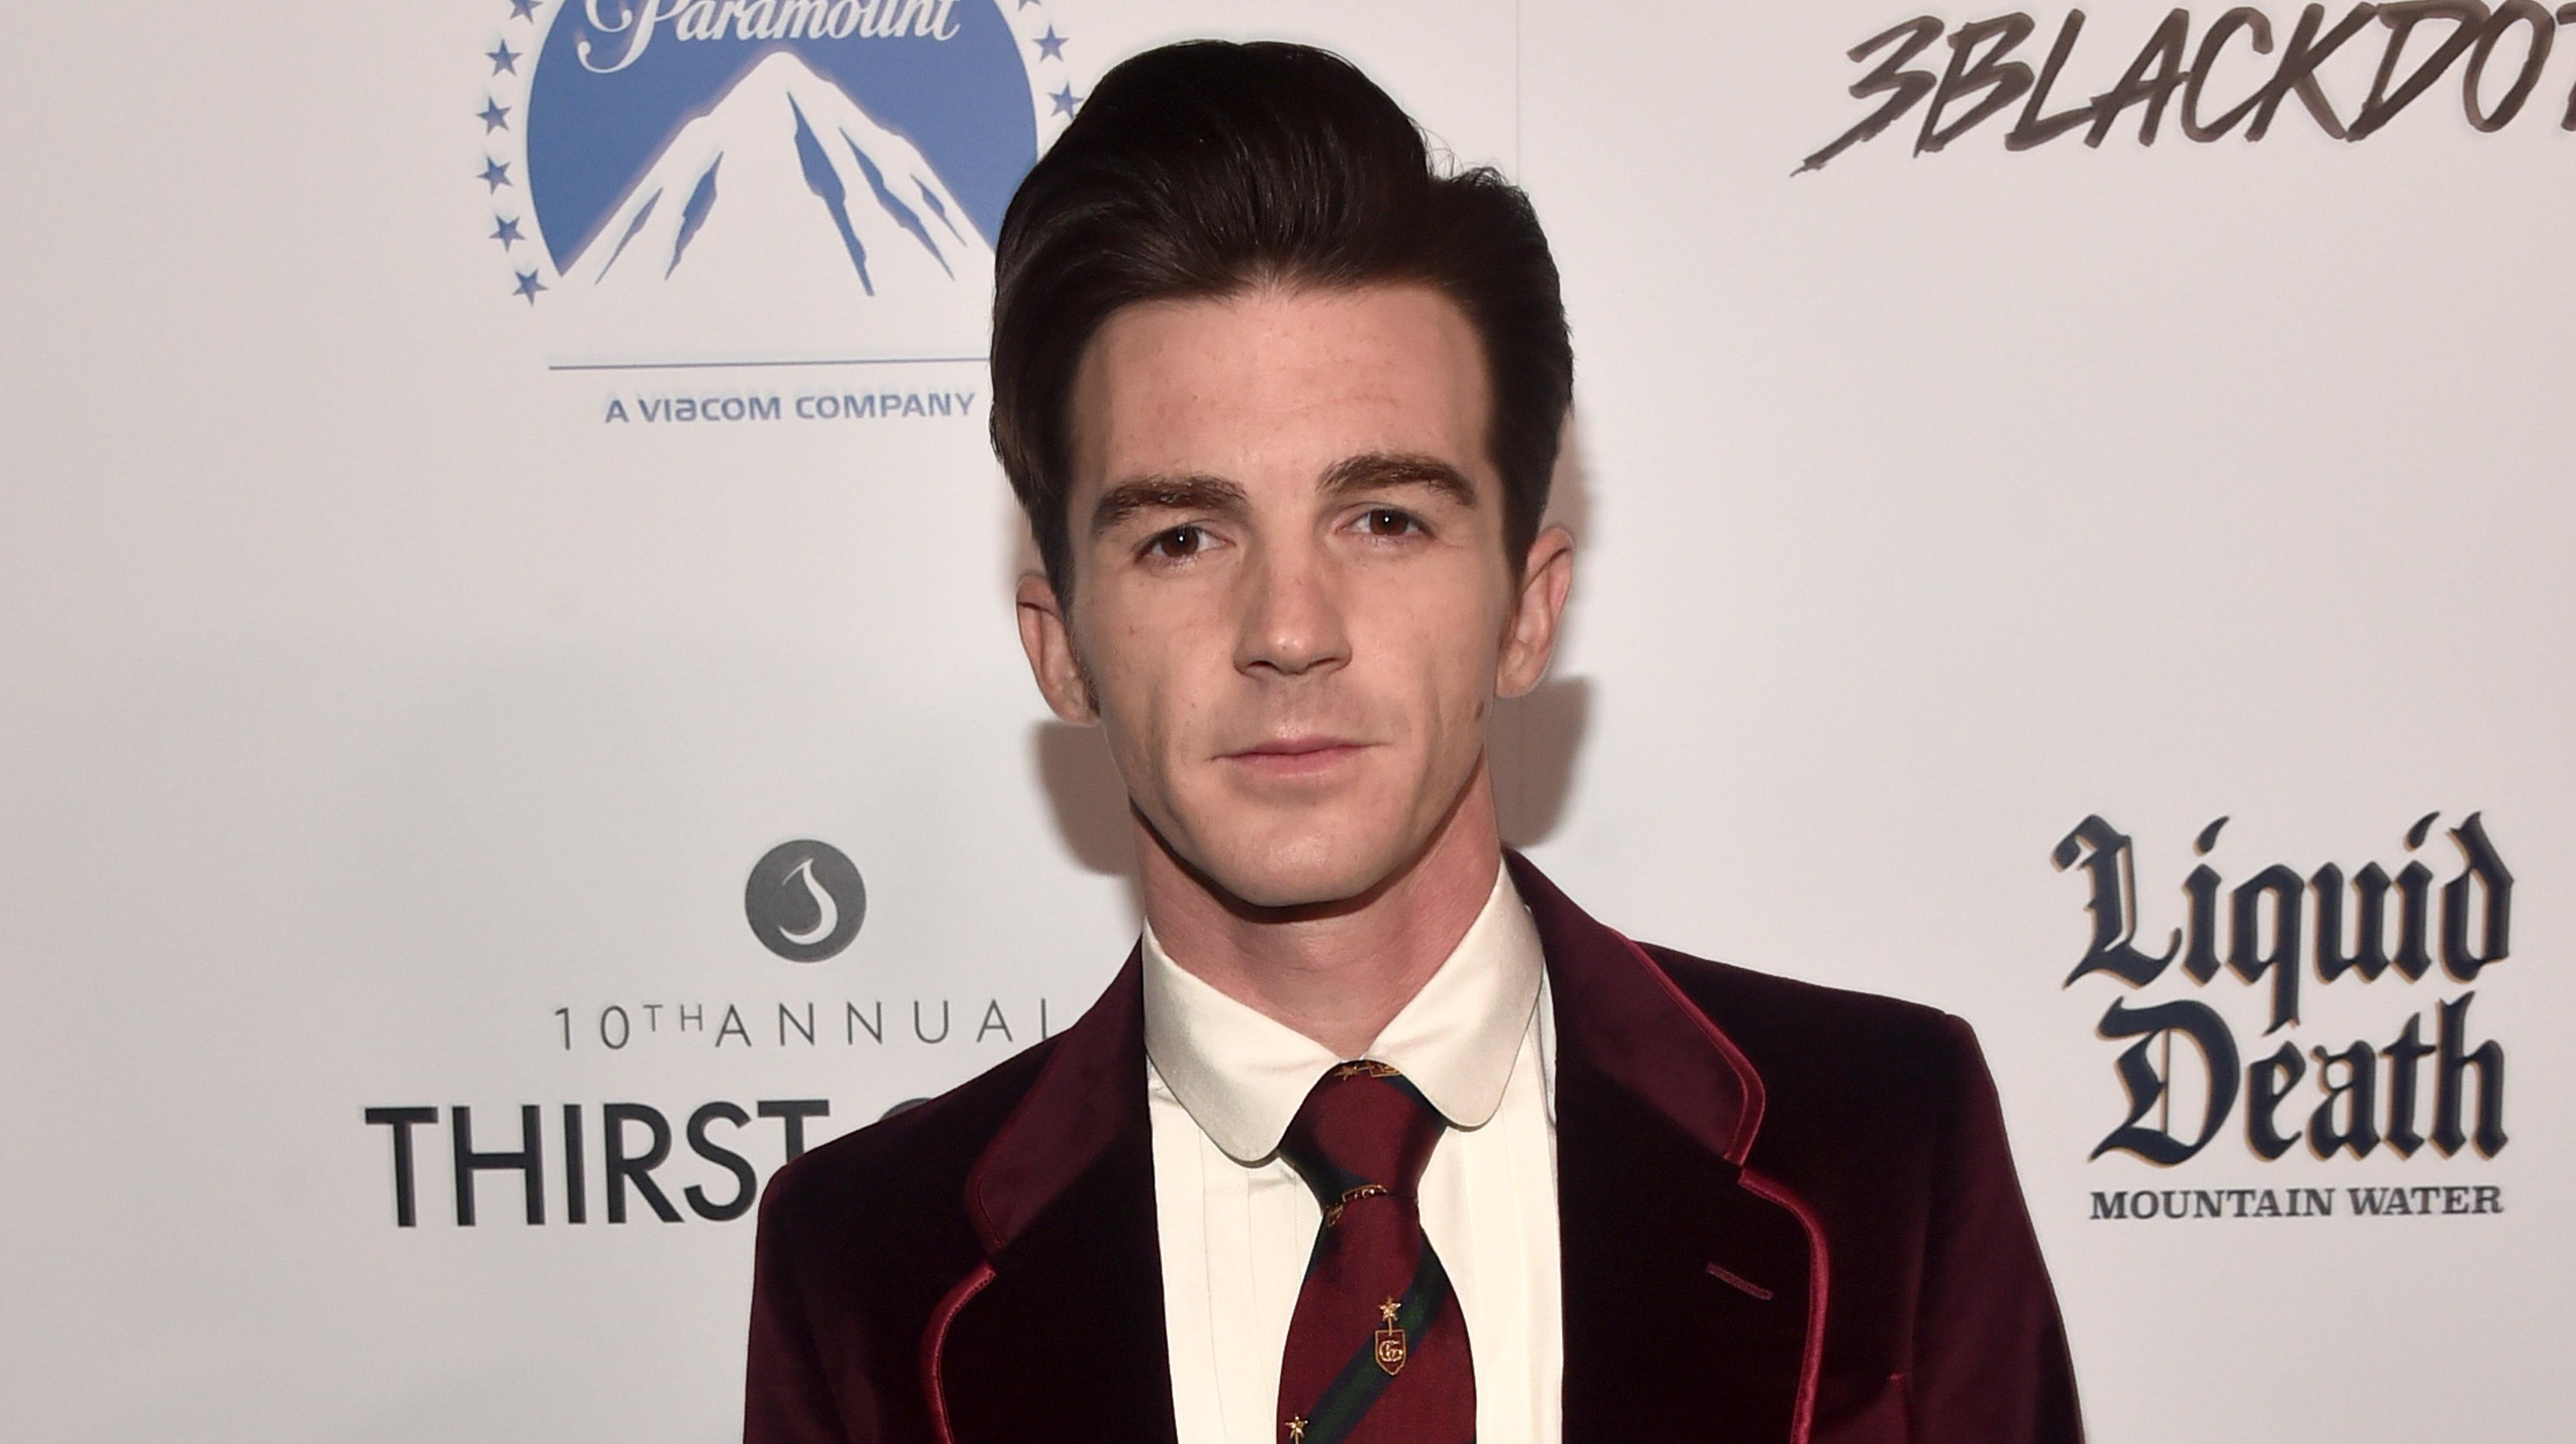 Drake Bell sentenced to 2 years of probation for attempted child endangerment